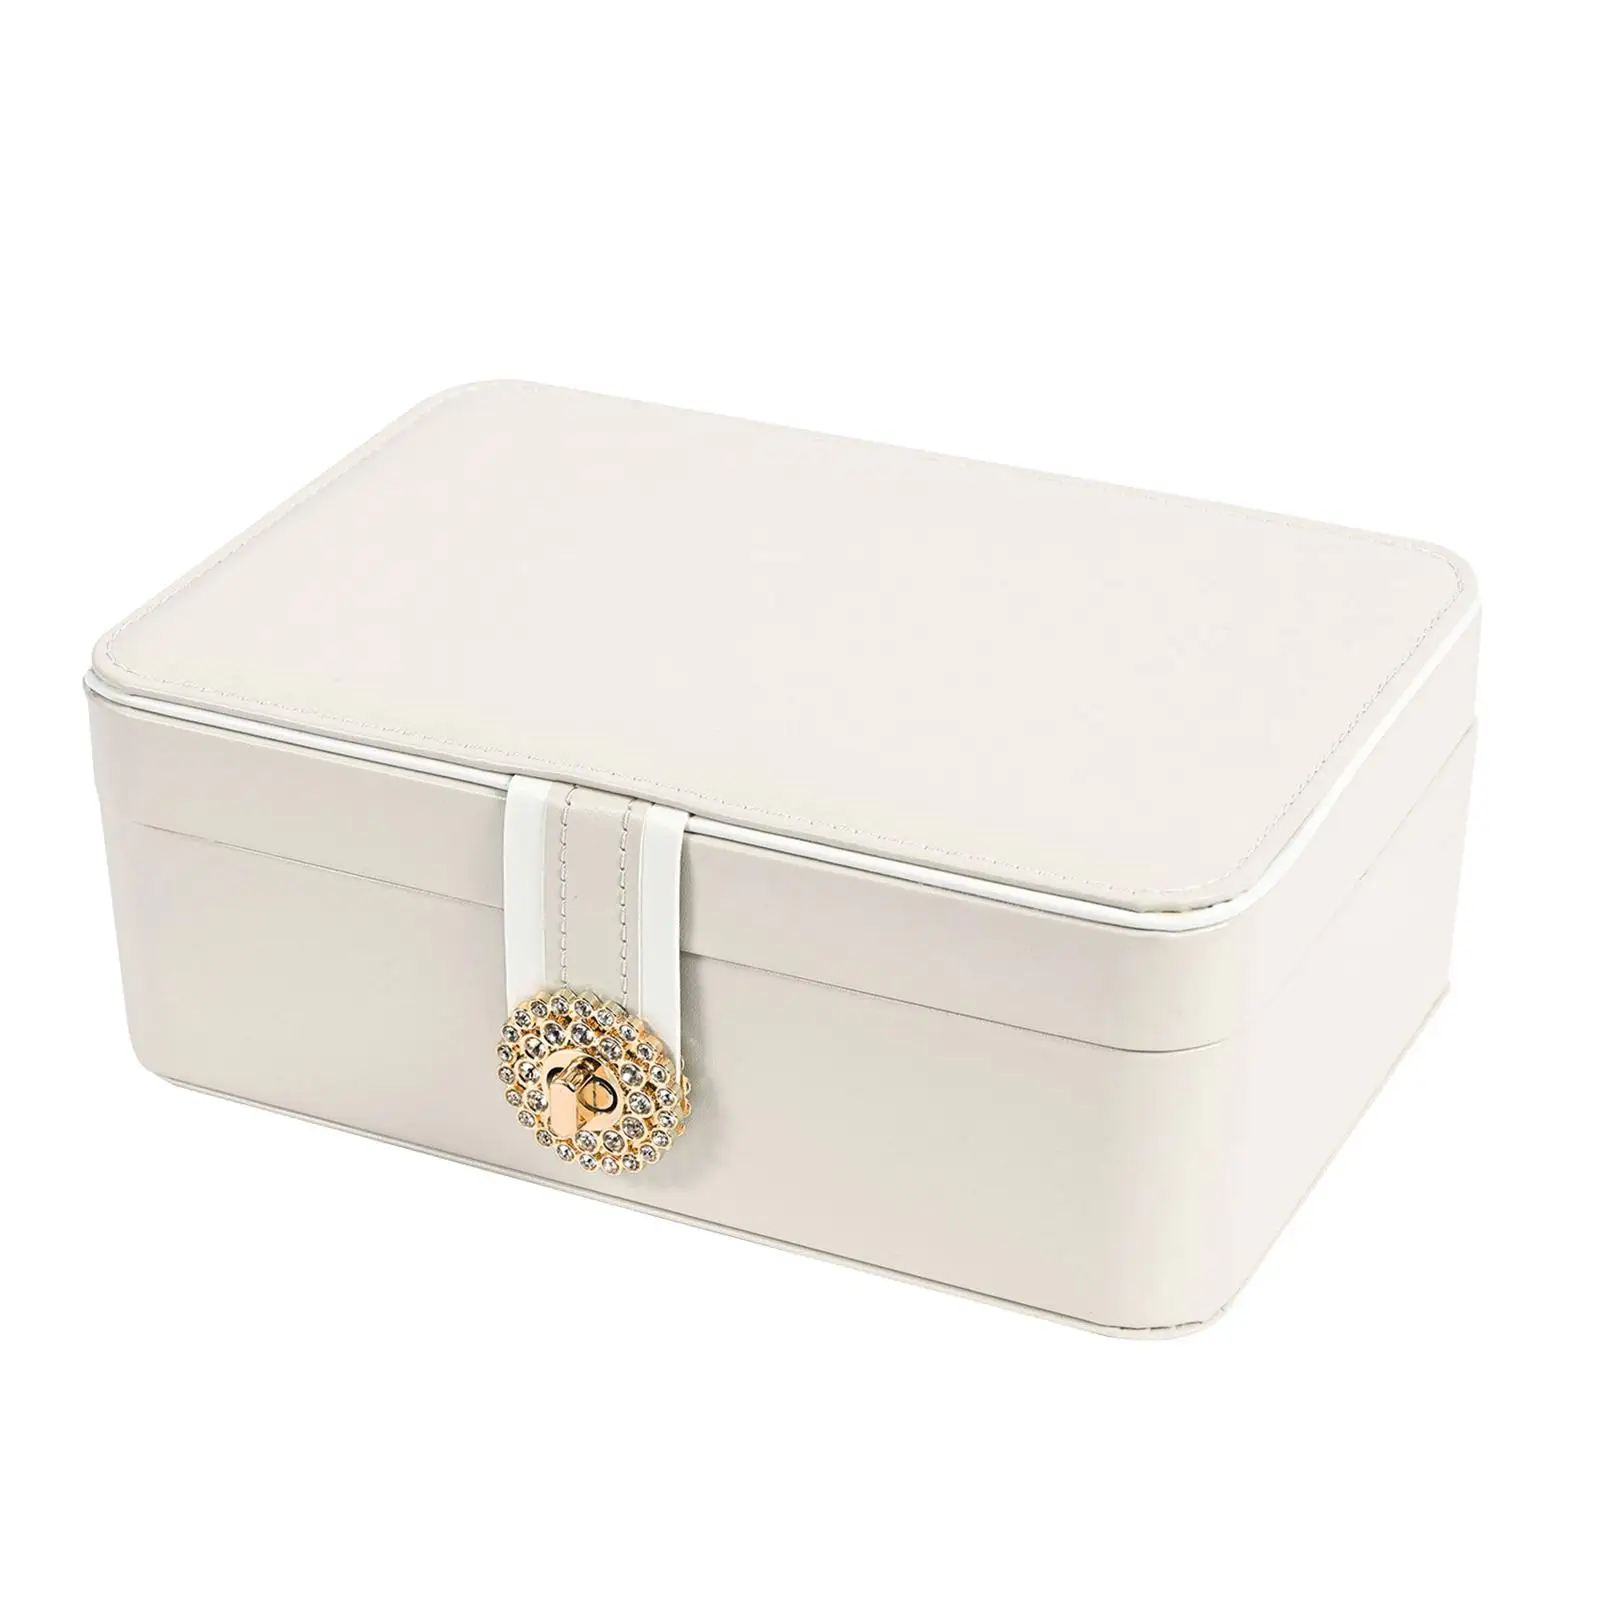 Jewelry Box PU Leather Jewelry Storage Holder for Stud Earrings Rings Bangle